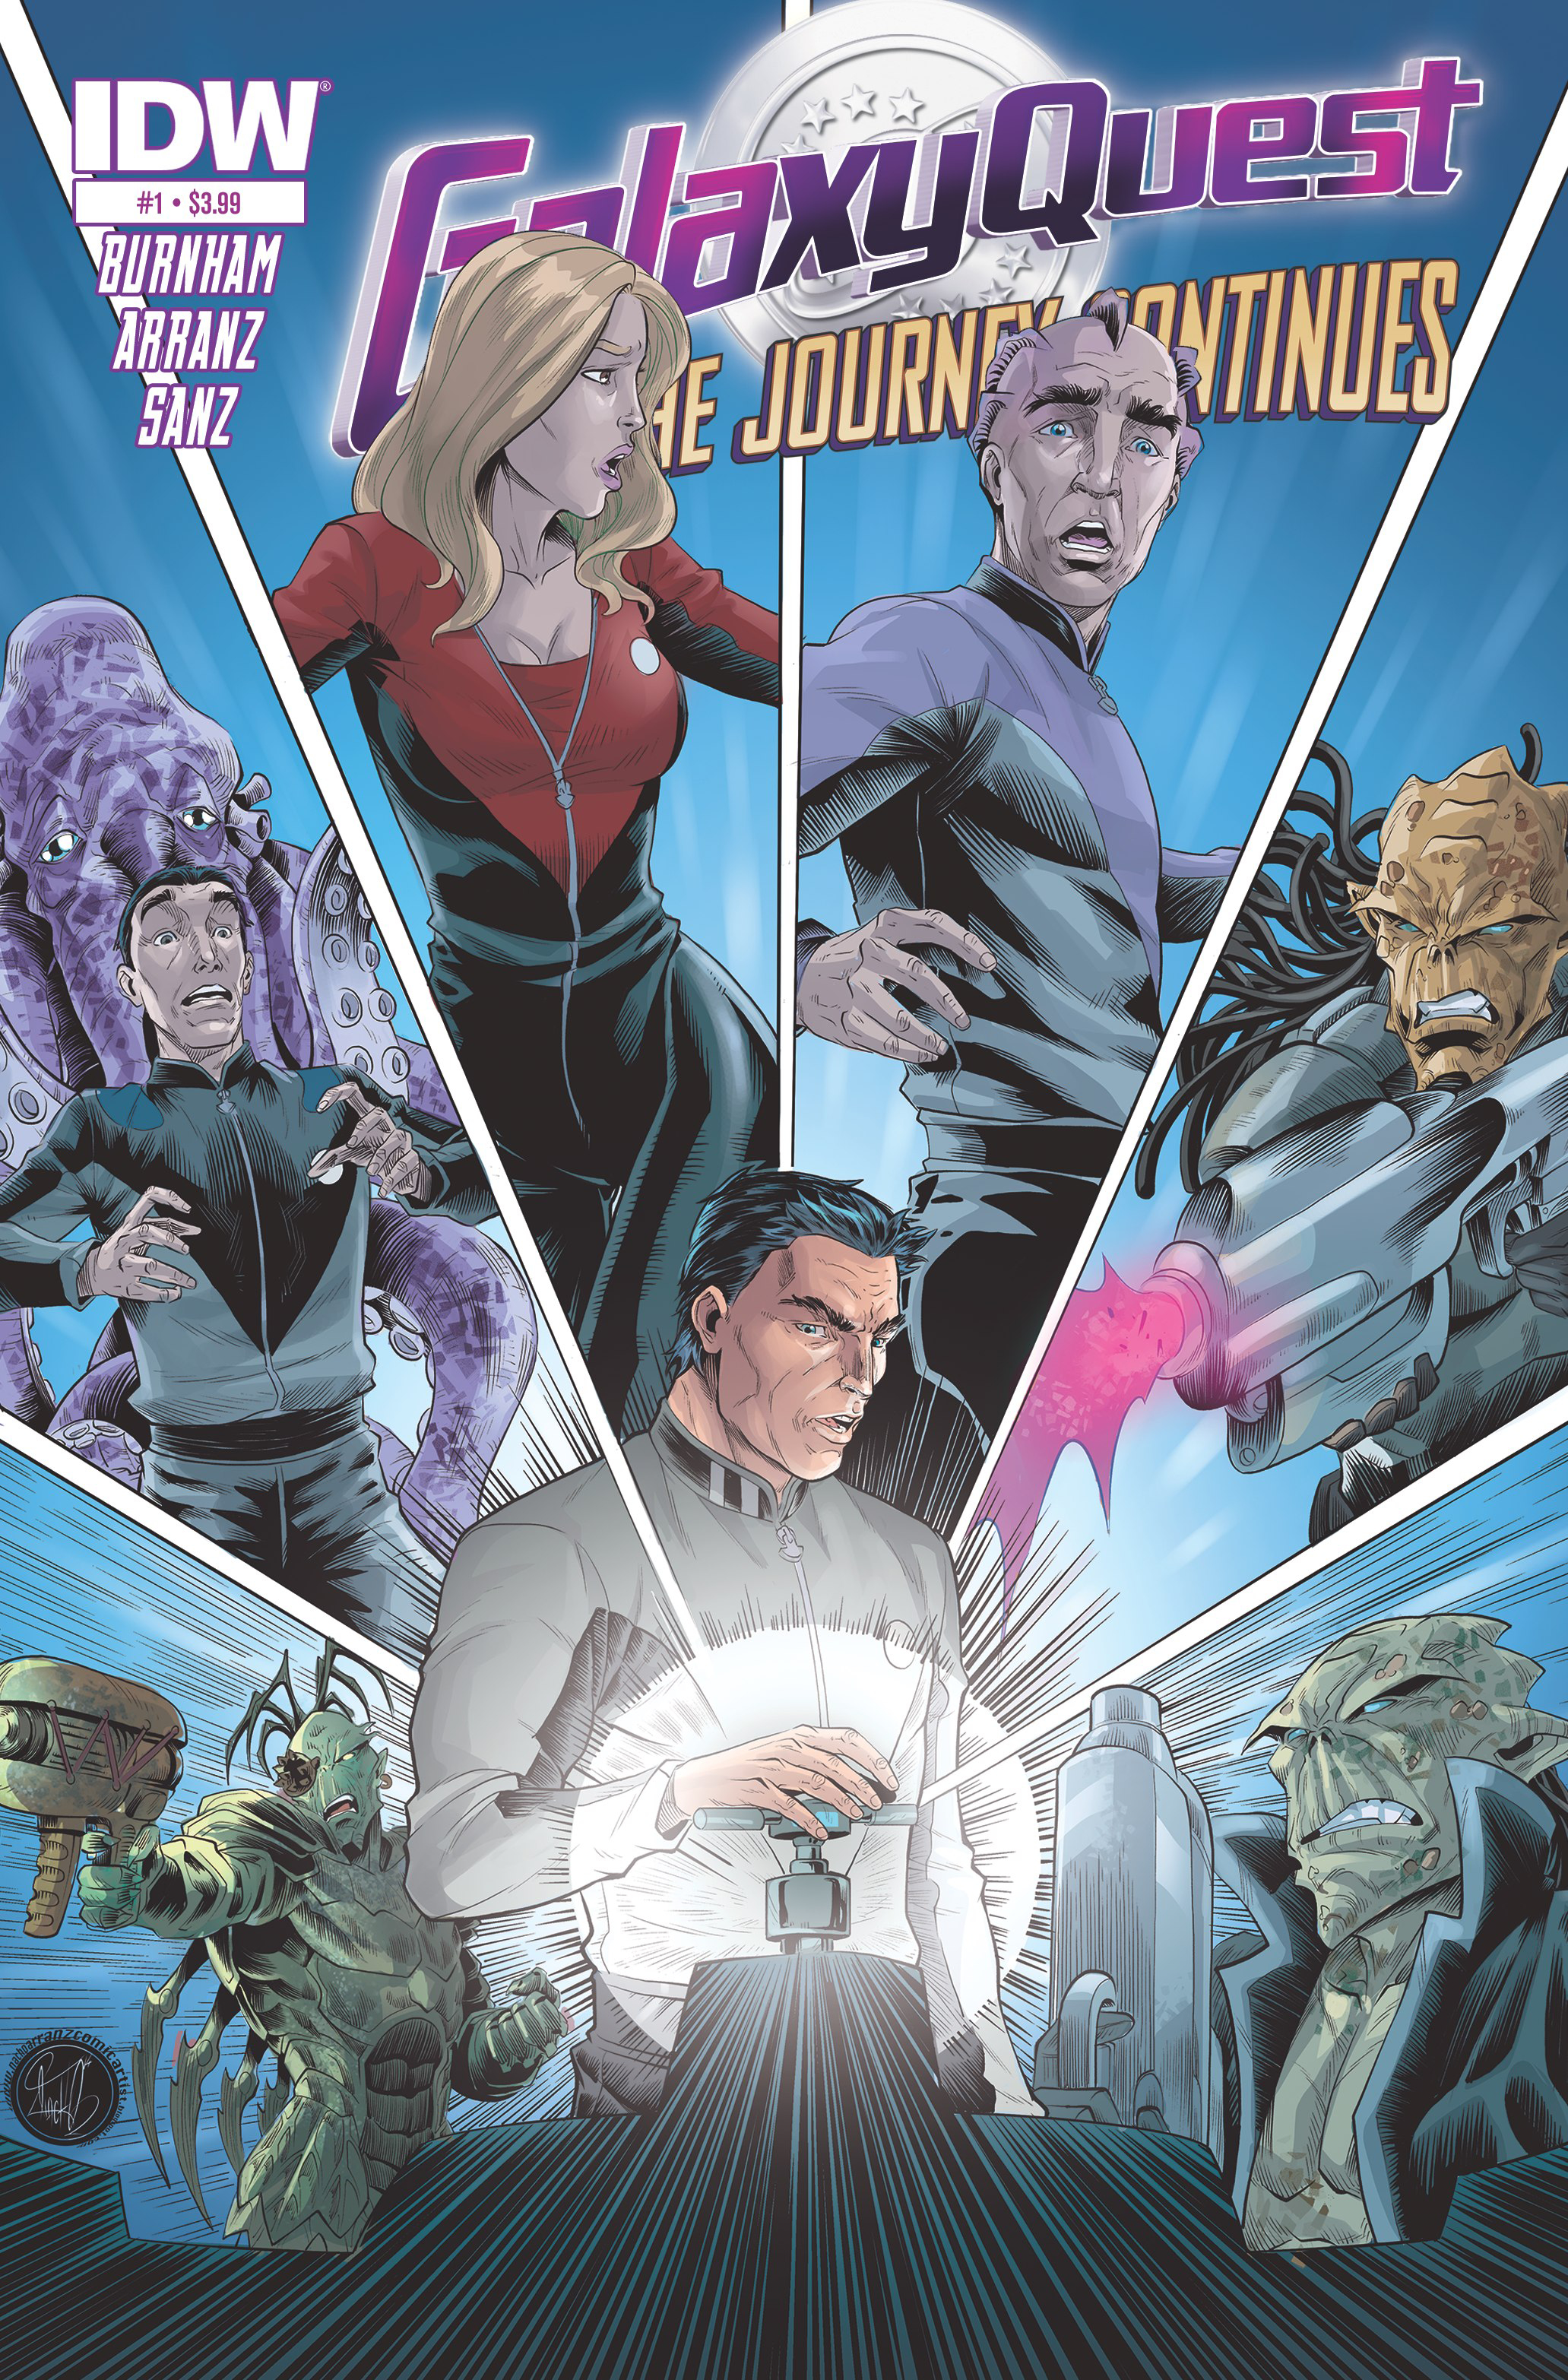 GALAXY QUEST JOURNEY CONTINUES #1 (OF 4)